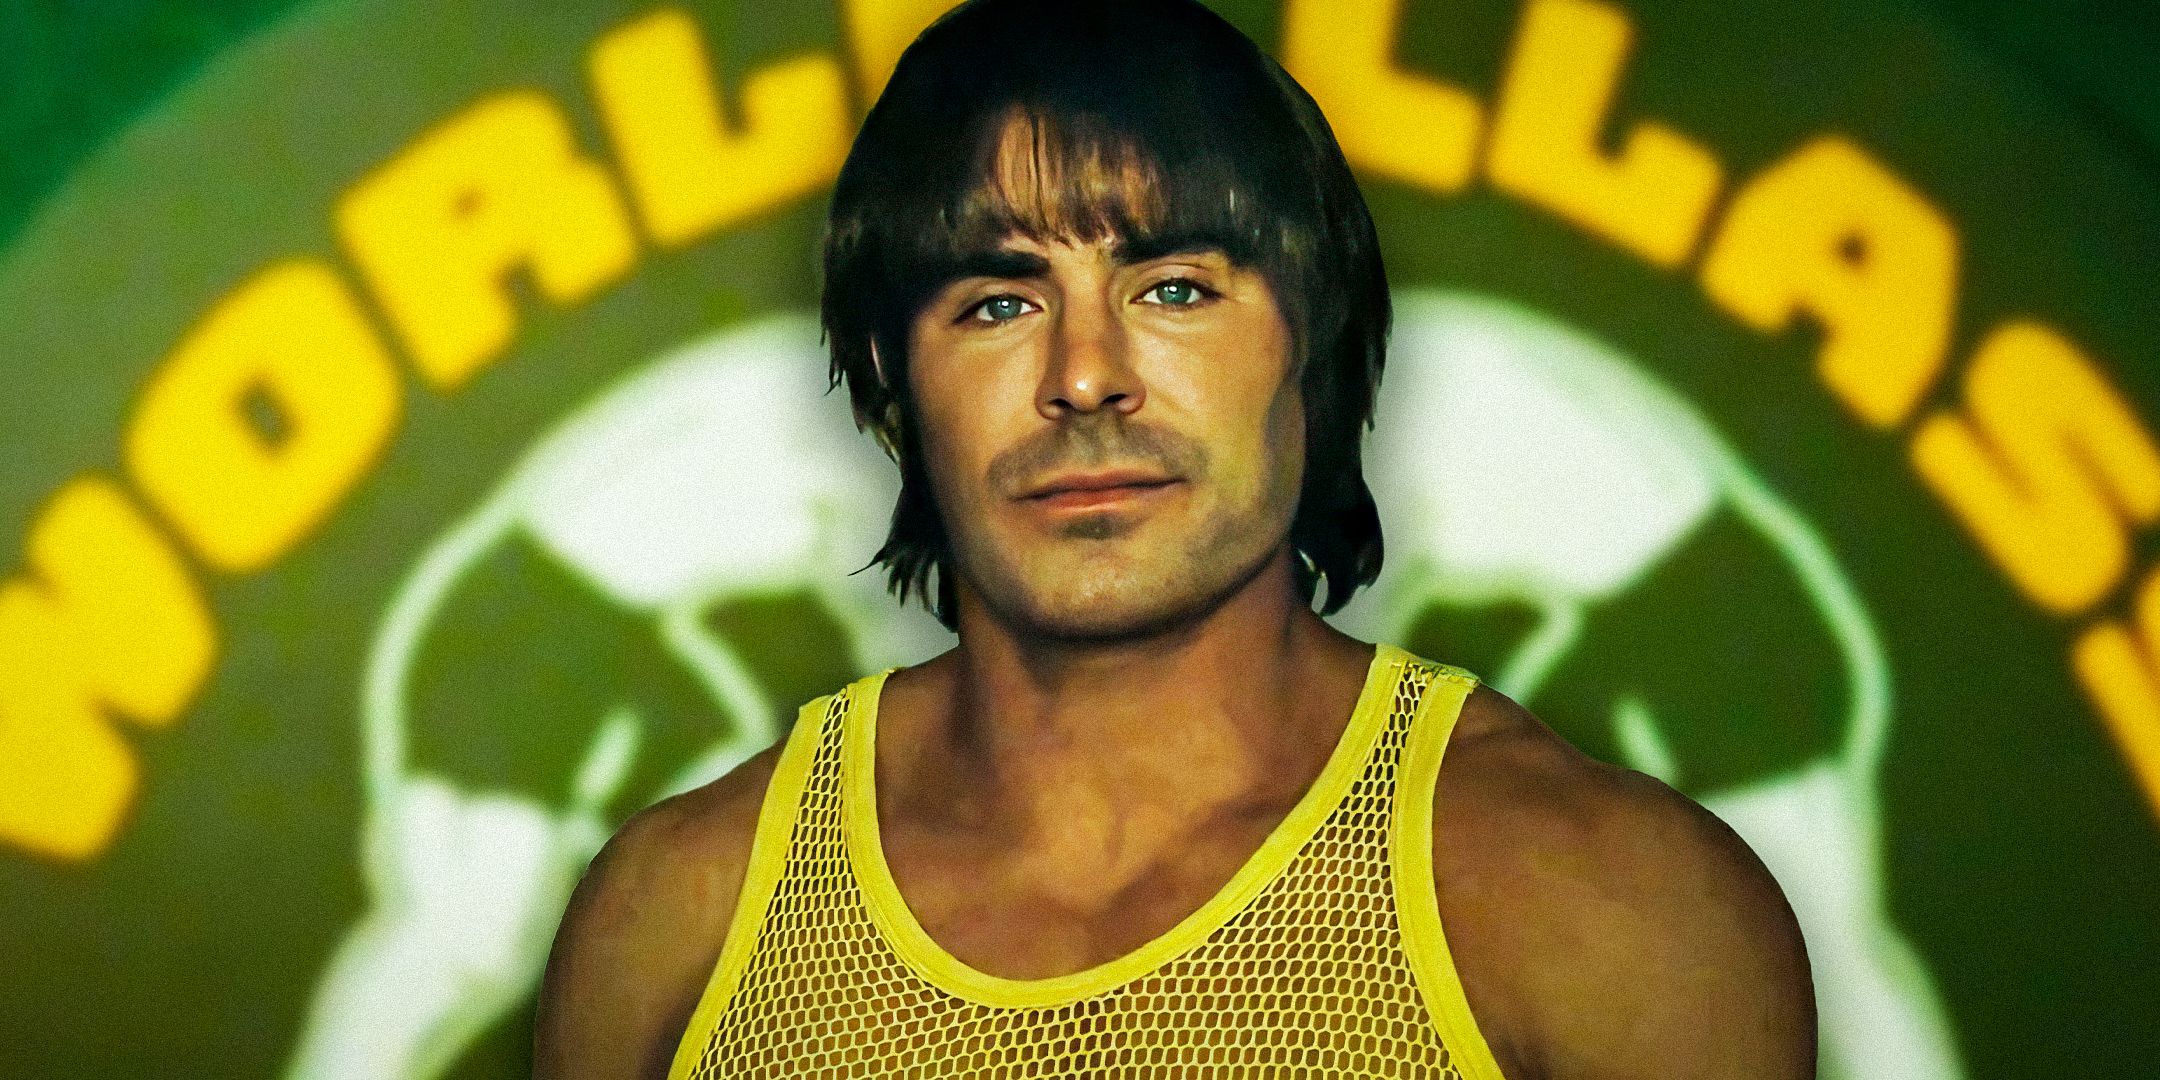 Zac Efron as Kevin Von Erich from The Iron Claw in a custom background